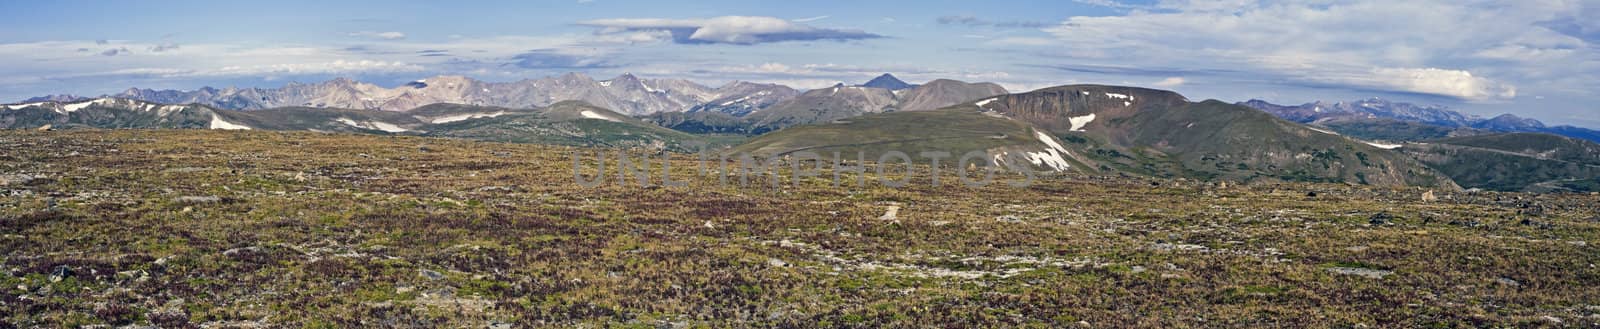 Colorful Tundra in Rocky National Park by benkrut